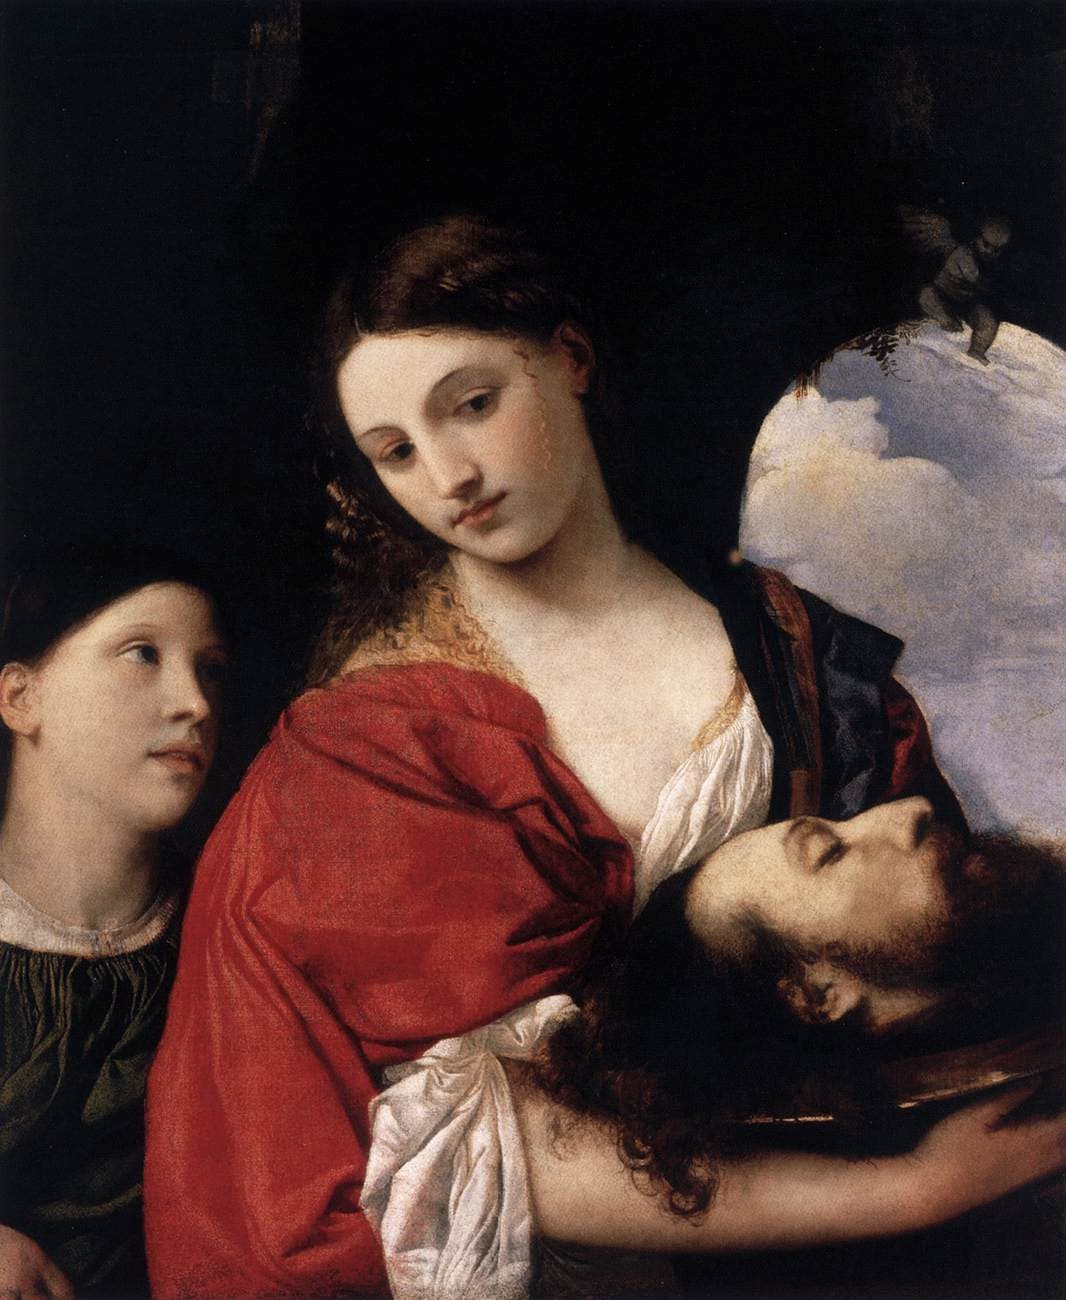 Titian: Salome with the Head of John the Baptist